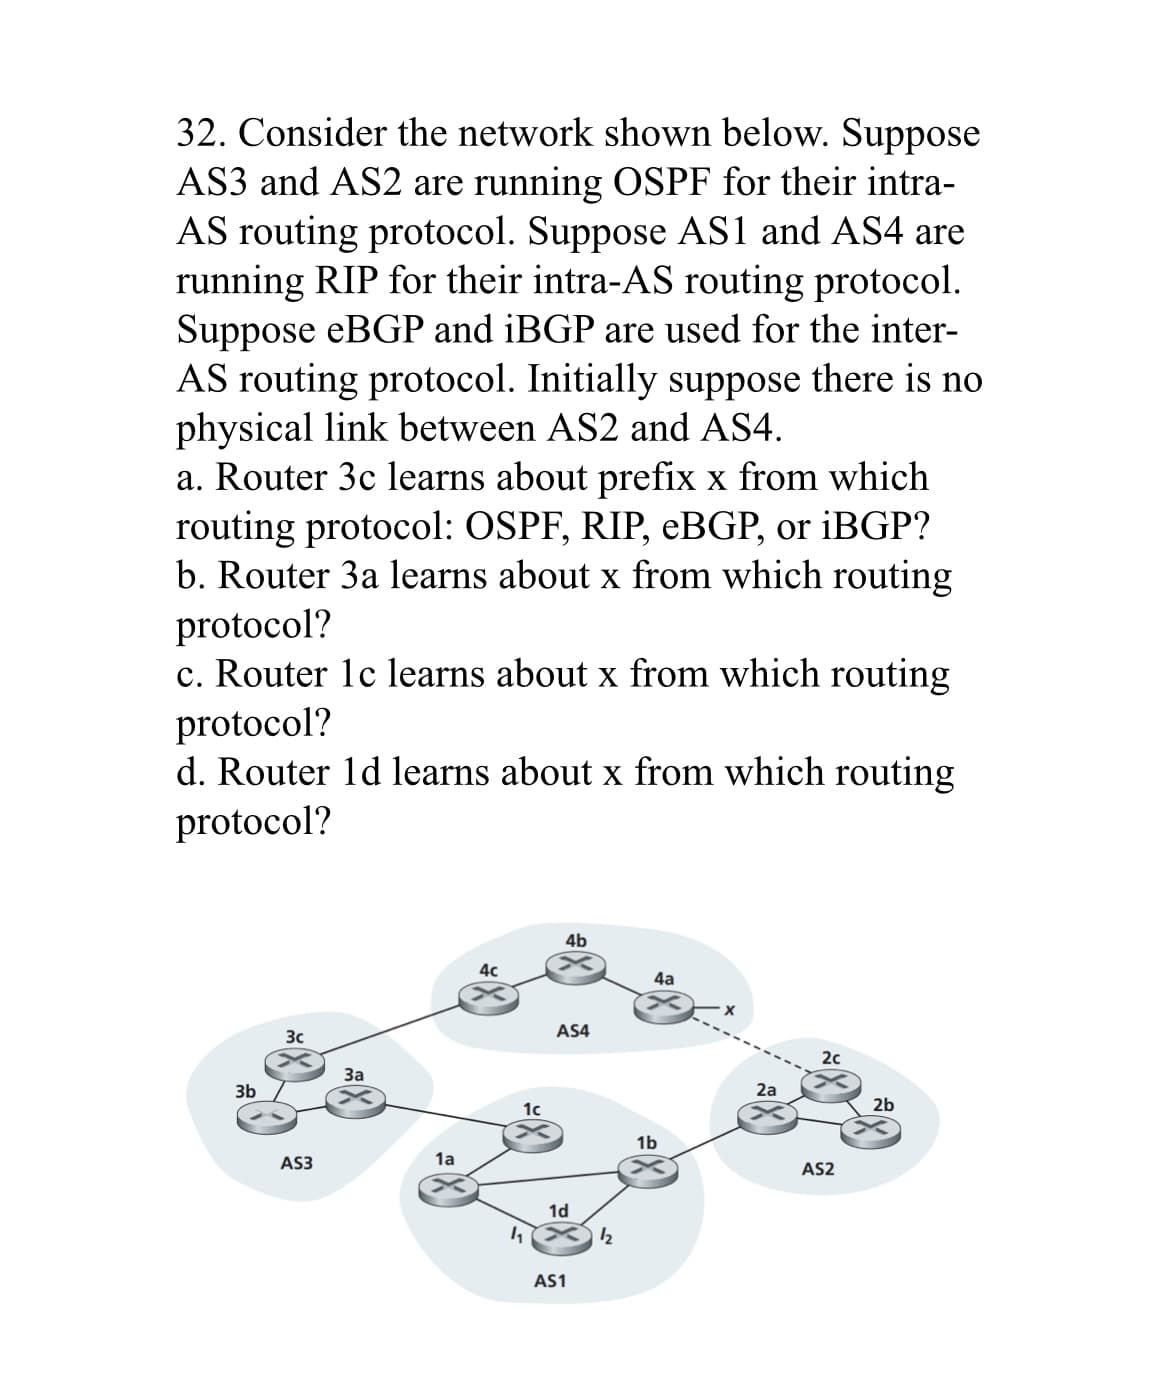 32. Consider the network shown below. Suppose
AS3 and AS2 are running OSPF for their intra-
AS routing protocol. Suppose AS1 and AS4 are
running RIP for their intra-AS routing protocol.
Suppose eBGP and iBGP are used for the inter-
AS routing protocol. Initially suppose there is no
physical link between AS2 and AS4.
a. Router 3c learns about prefix x from which
routing protocol: OSPF, RIP, eBGP, or iBGP?
b. Router 3a learns about x from which routing
protocol?
c. Router 1c learns about x from which routing
protocol?
d. Router 1d learns about x from which routing
protocol?
3b
3c
AS3
3a
1a
4c
1c
1₁
4b
AS4
1d
AS1
1₂
4a
1b
X
2a
2c
AS2
2b